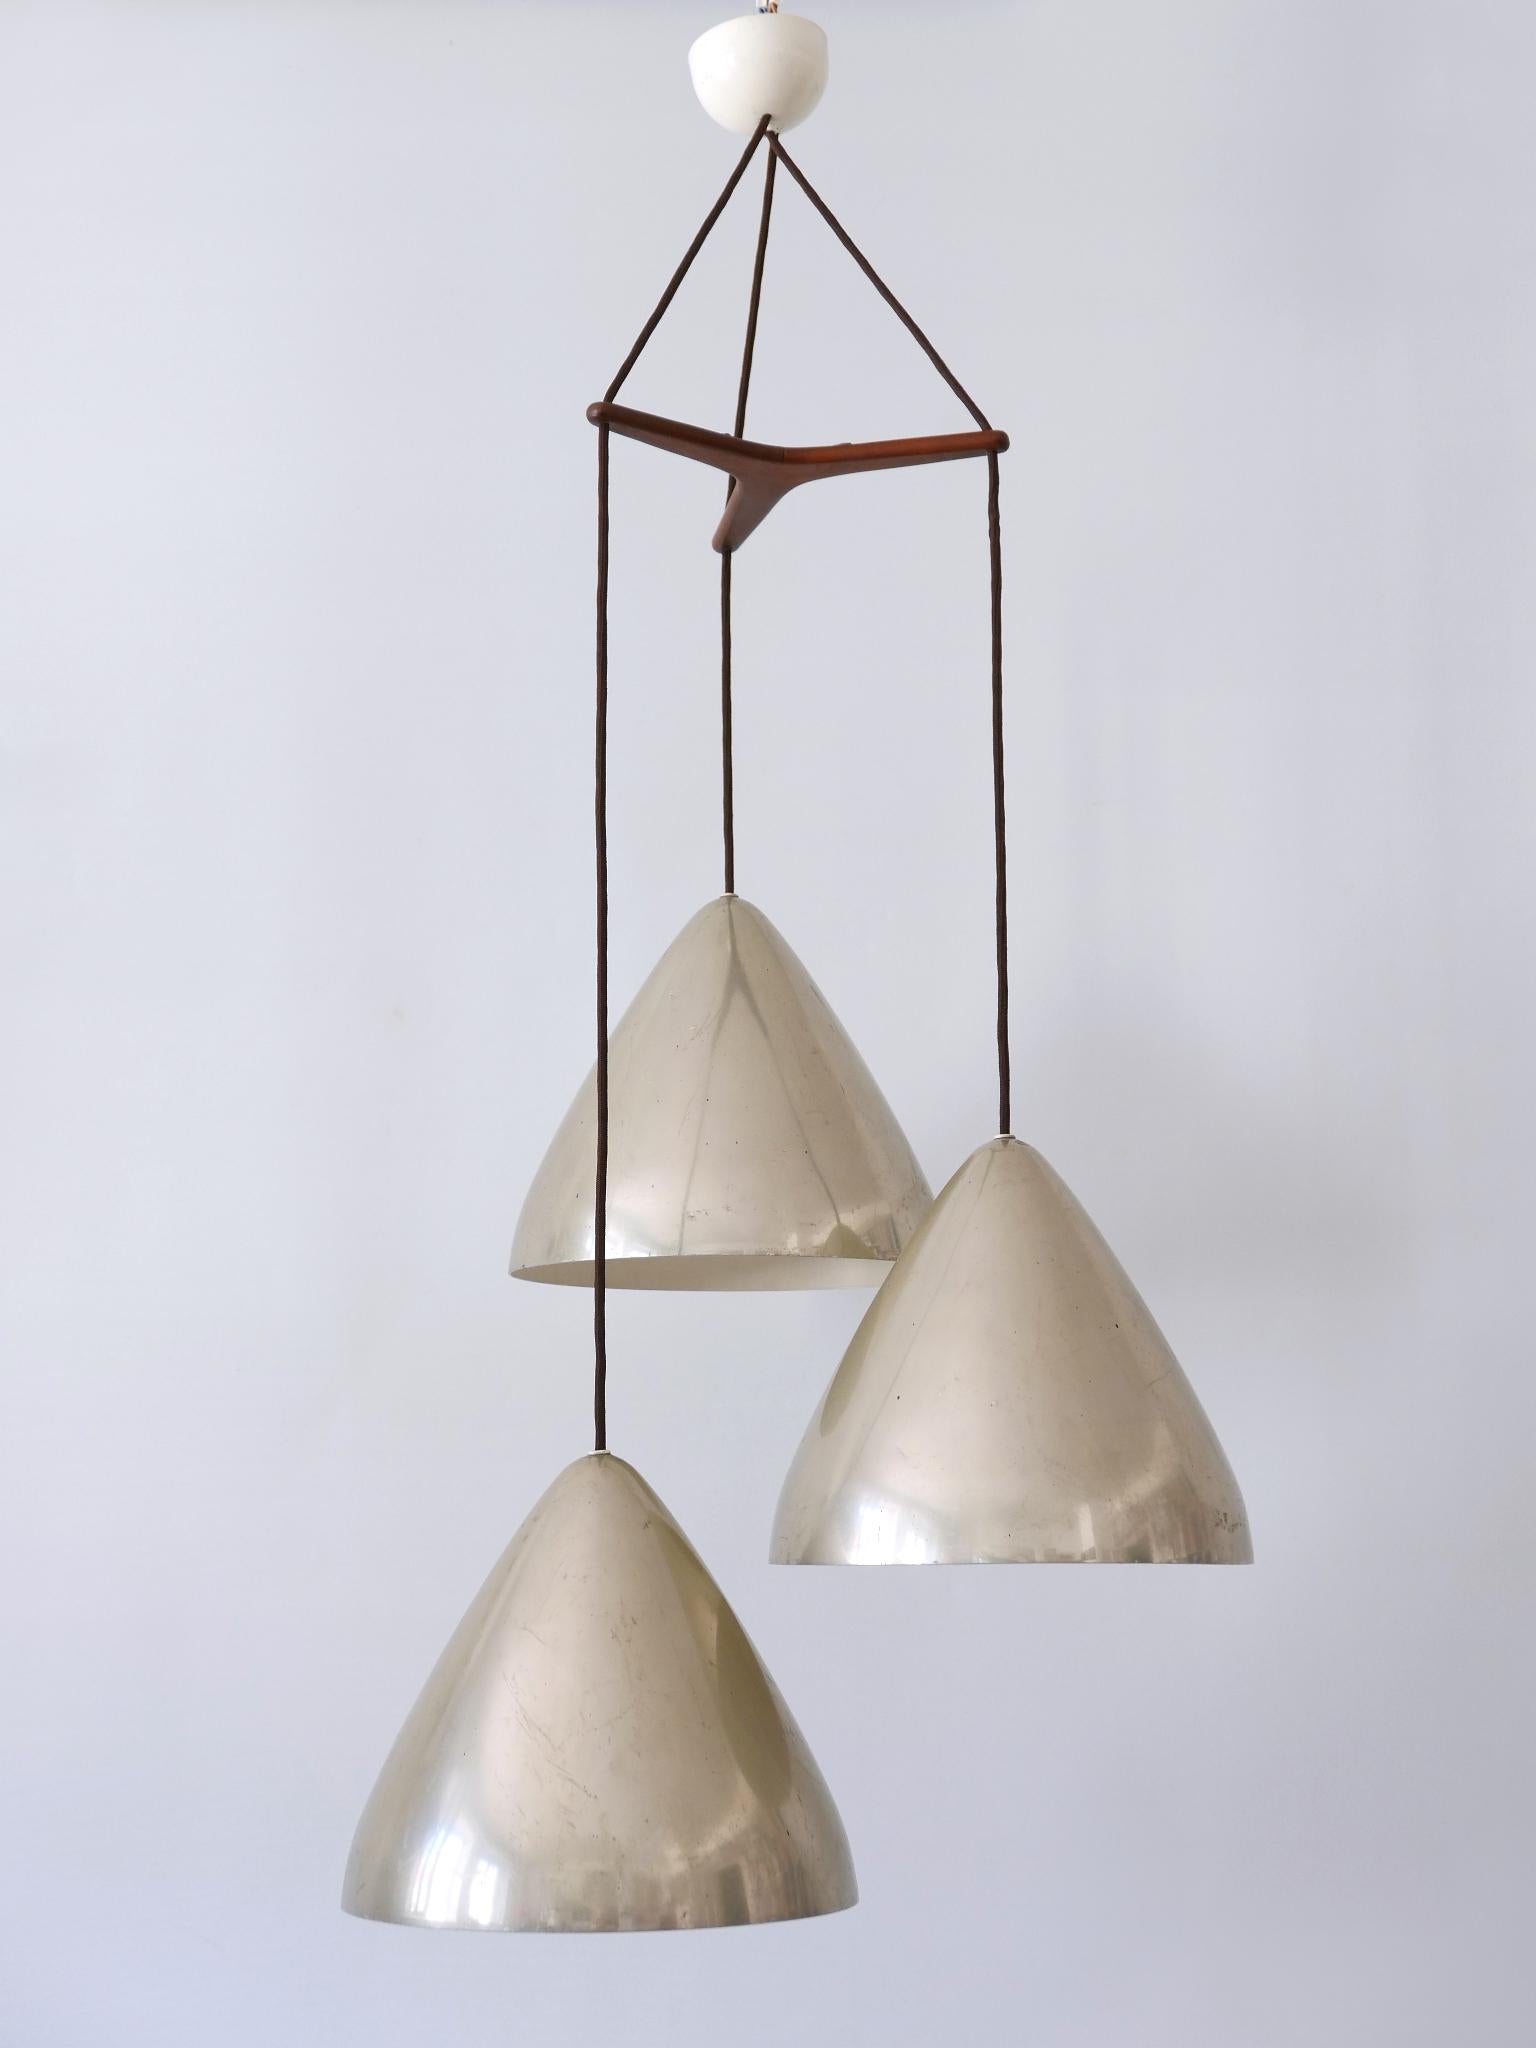 Elegant Cascading Pendant Lamp by Lisa Johansson-Pape for Orno Finland 1960s In Good Condition For Sale In Munich, DE